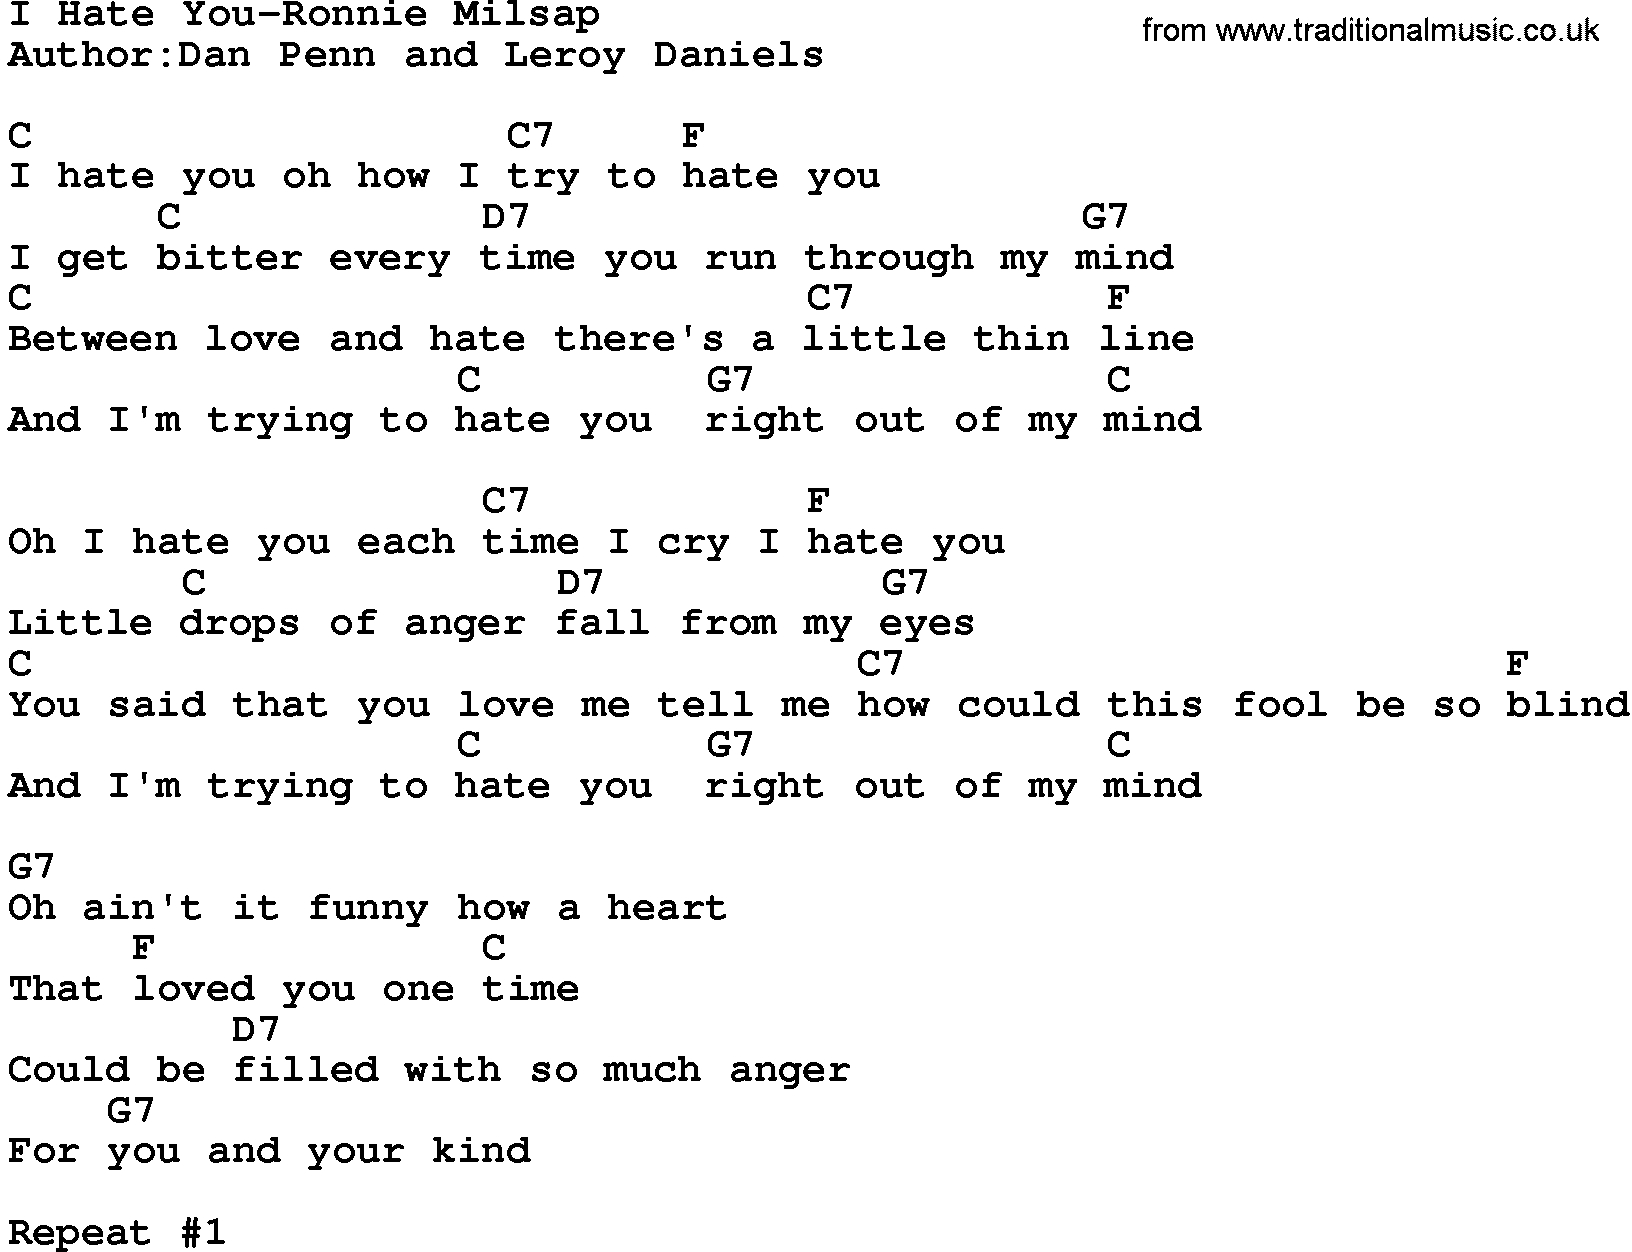 Country music song: I Hate You-Ronnie Milsap lyrics and chords